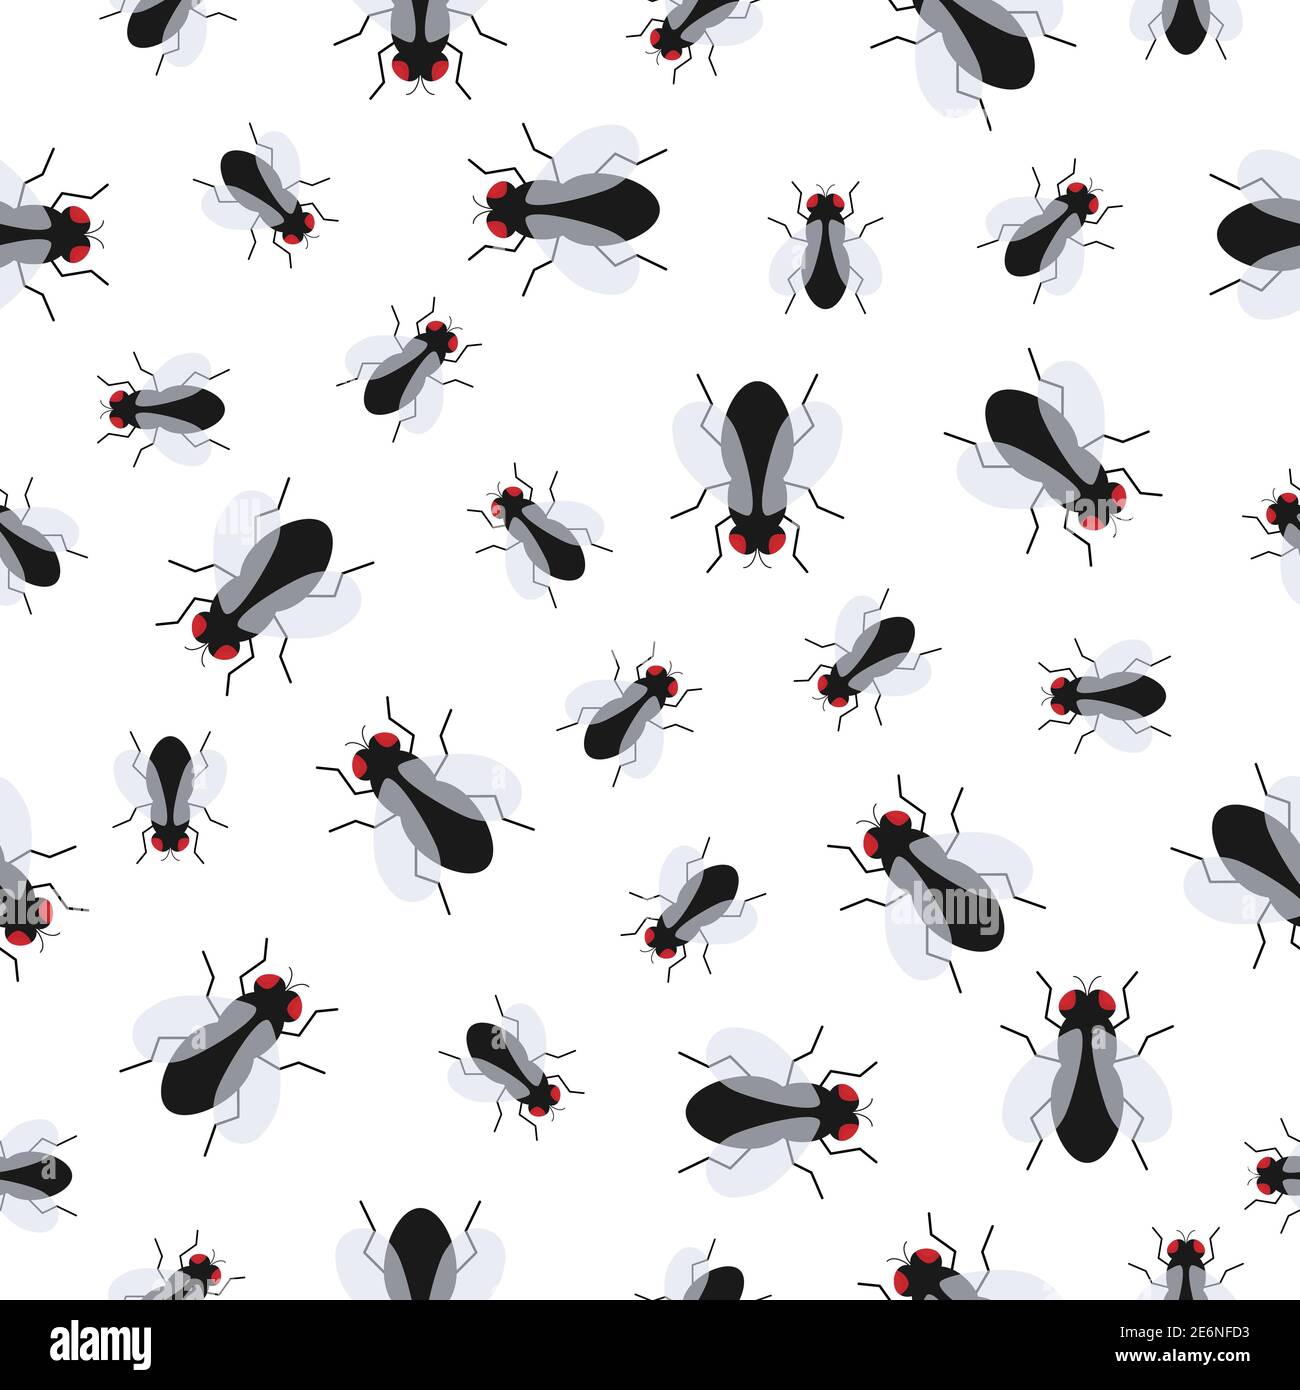 Fly insect flat vector seamless pattern background. Small flies isolated on white. Stock Vector